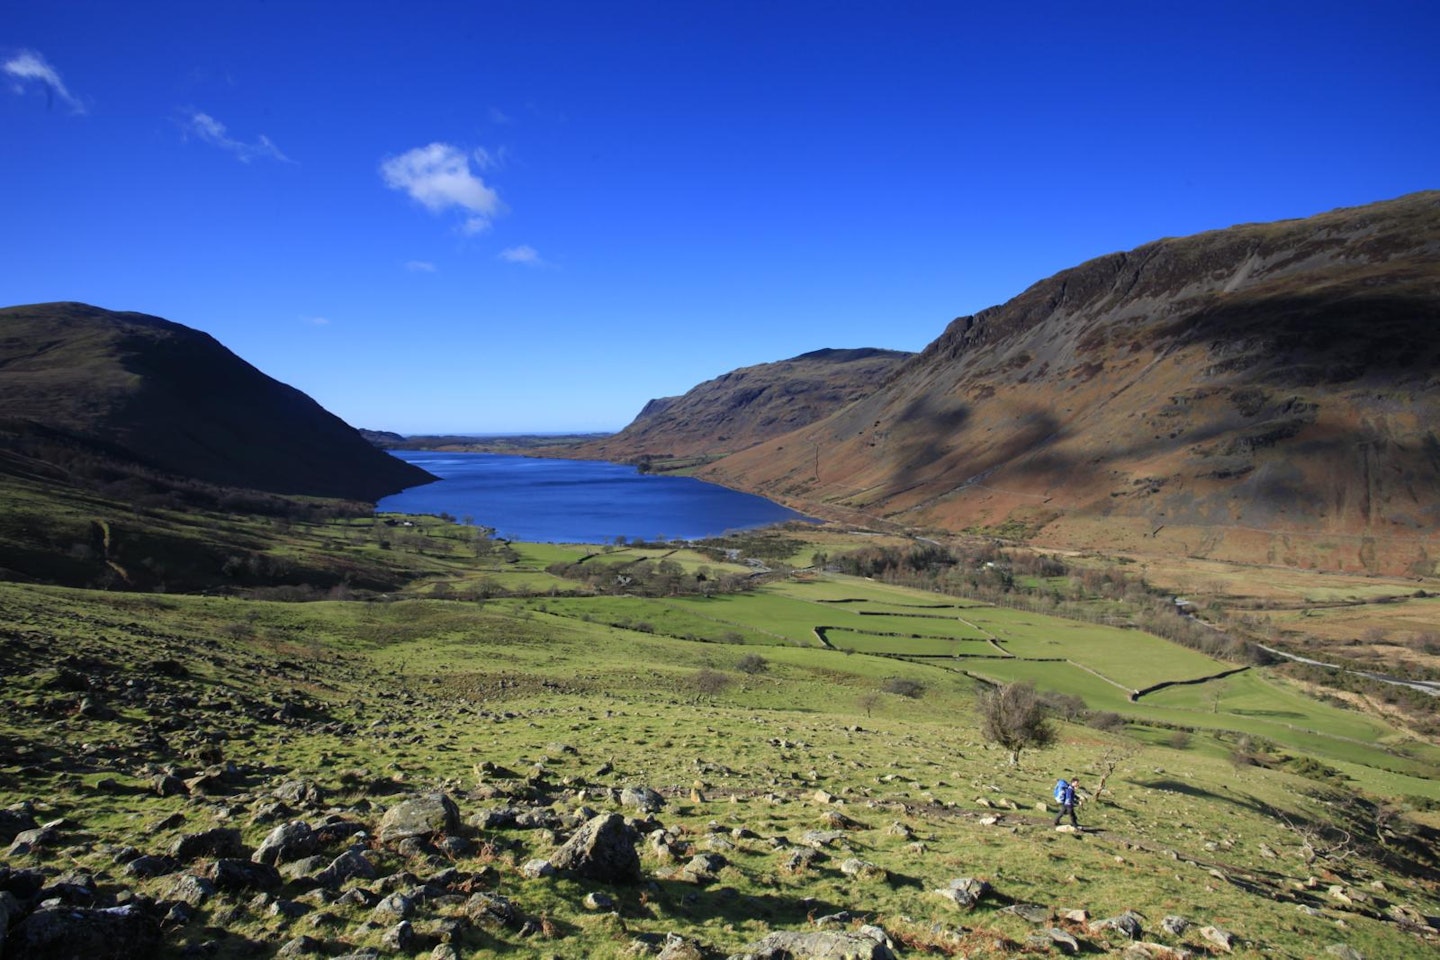 Wast Water at the base of Scafell Pike